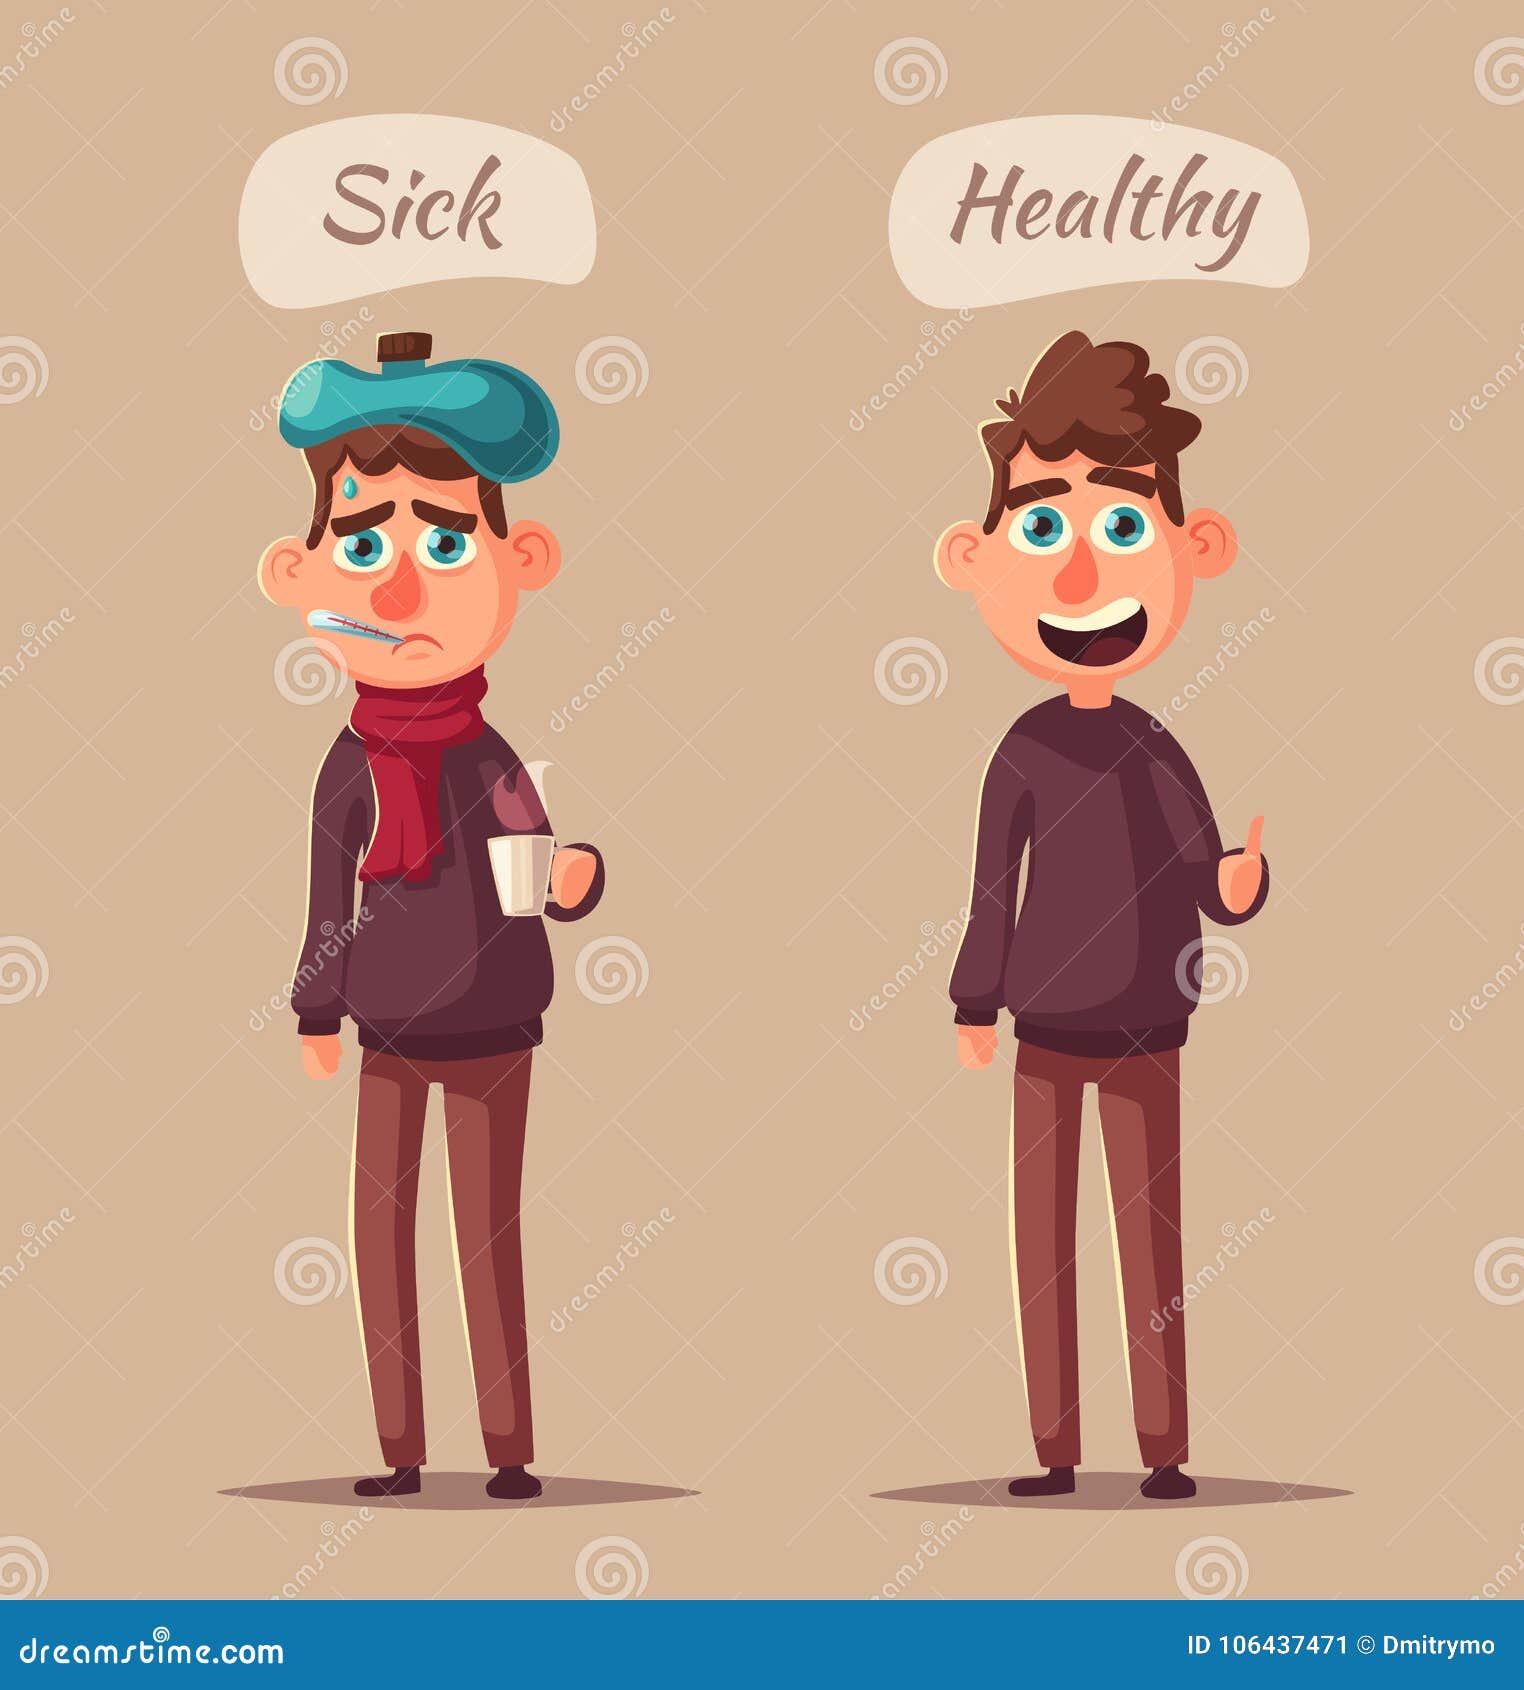 Sick Man. Unhappy Character Stock Vector - Illustration of medical,  infection: 106437471